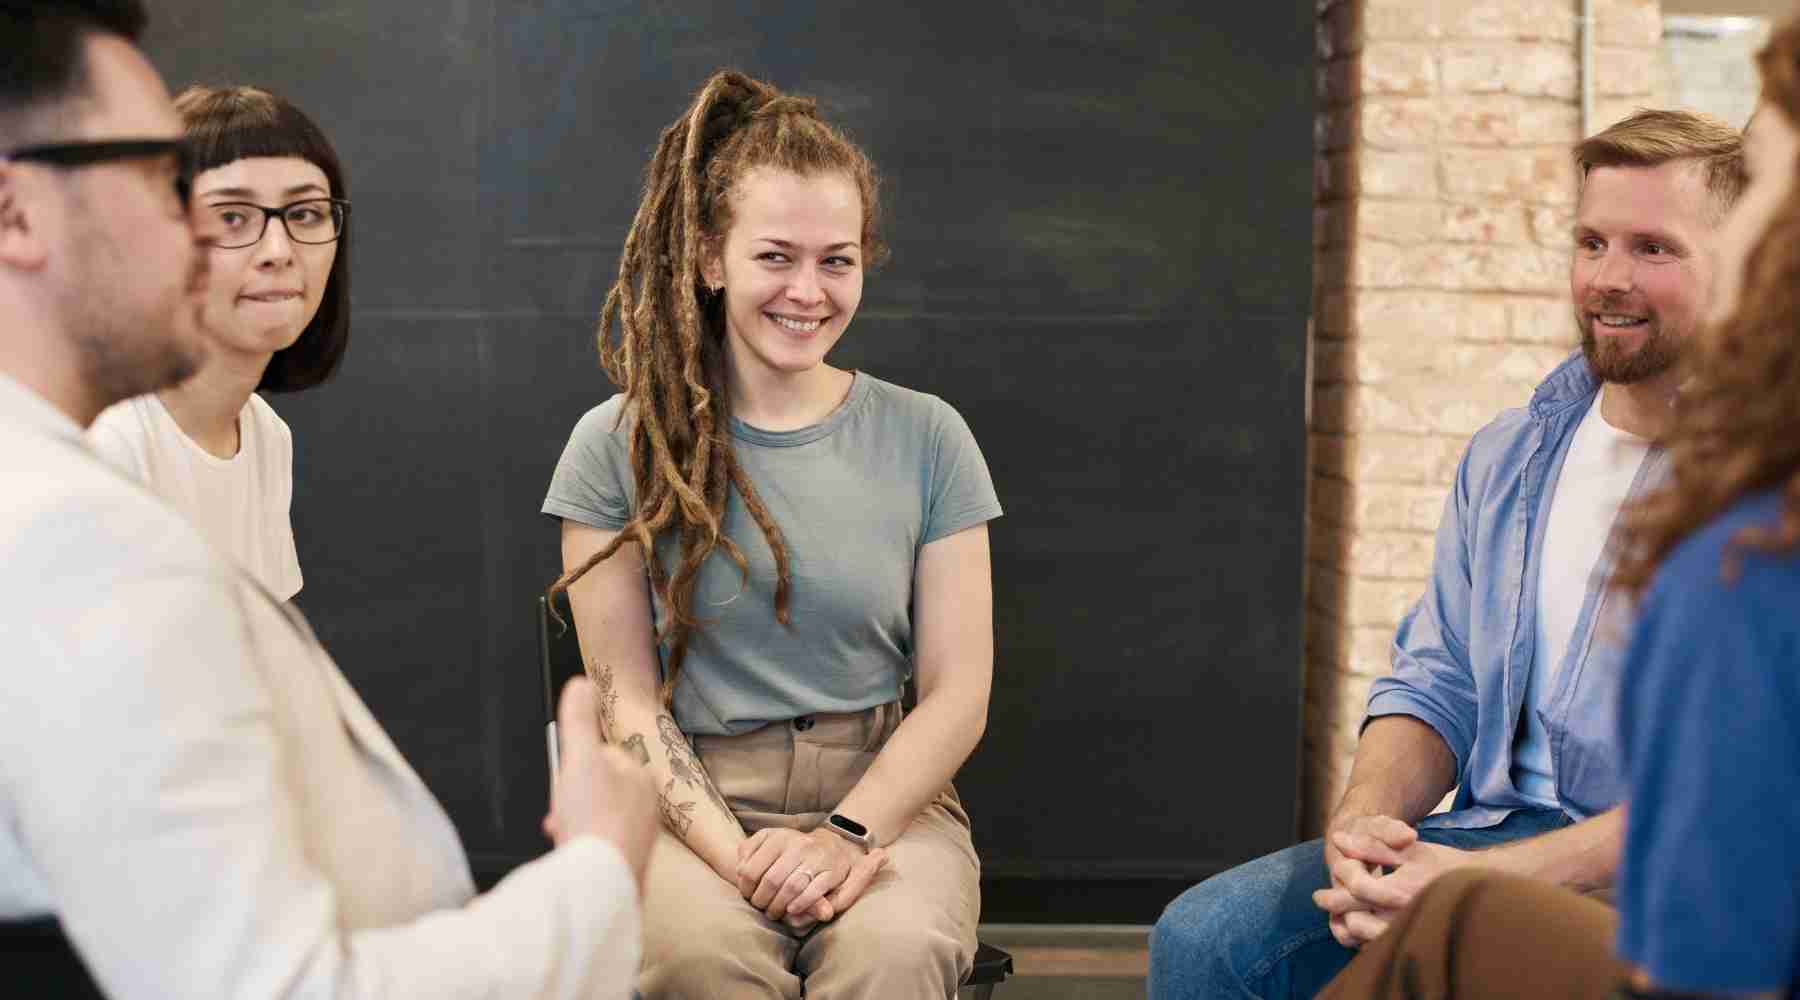 Paid Focus Group for teens